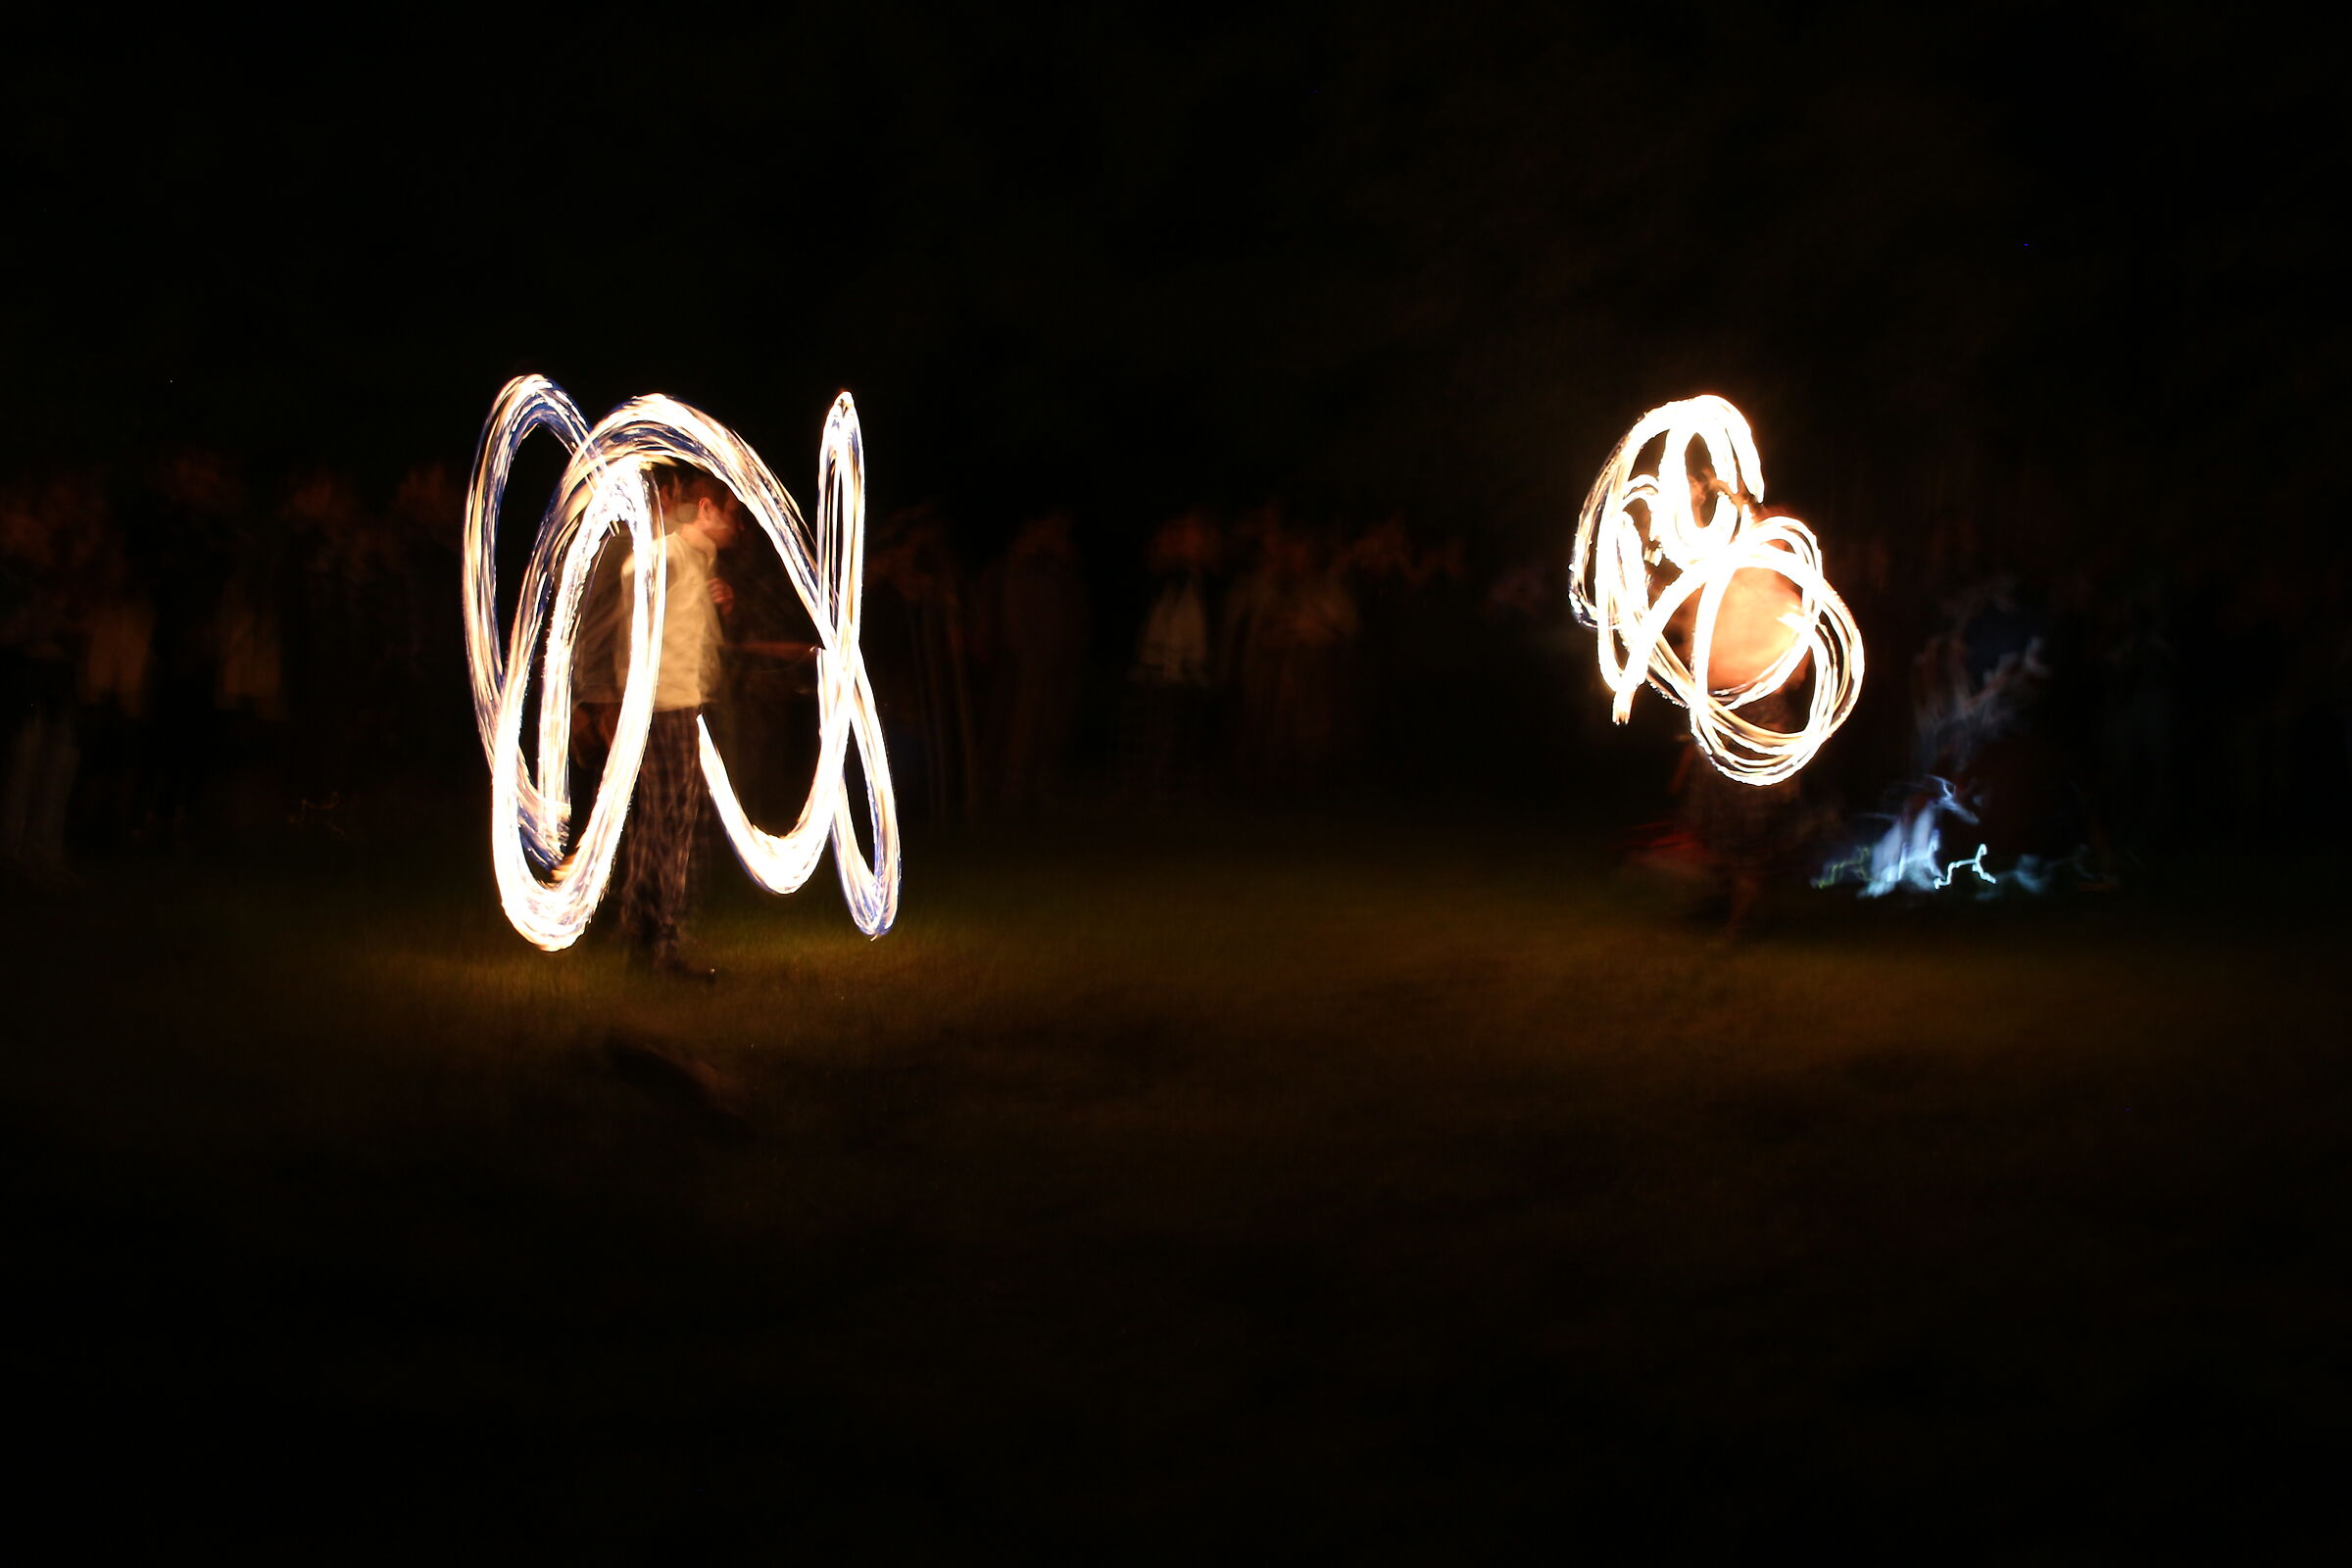 Playing with fire - Beltane's jugglers ...